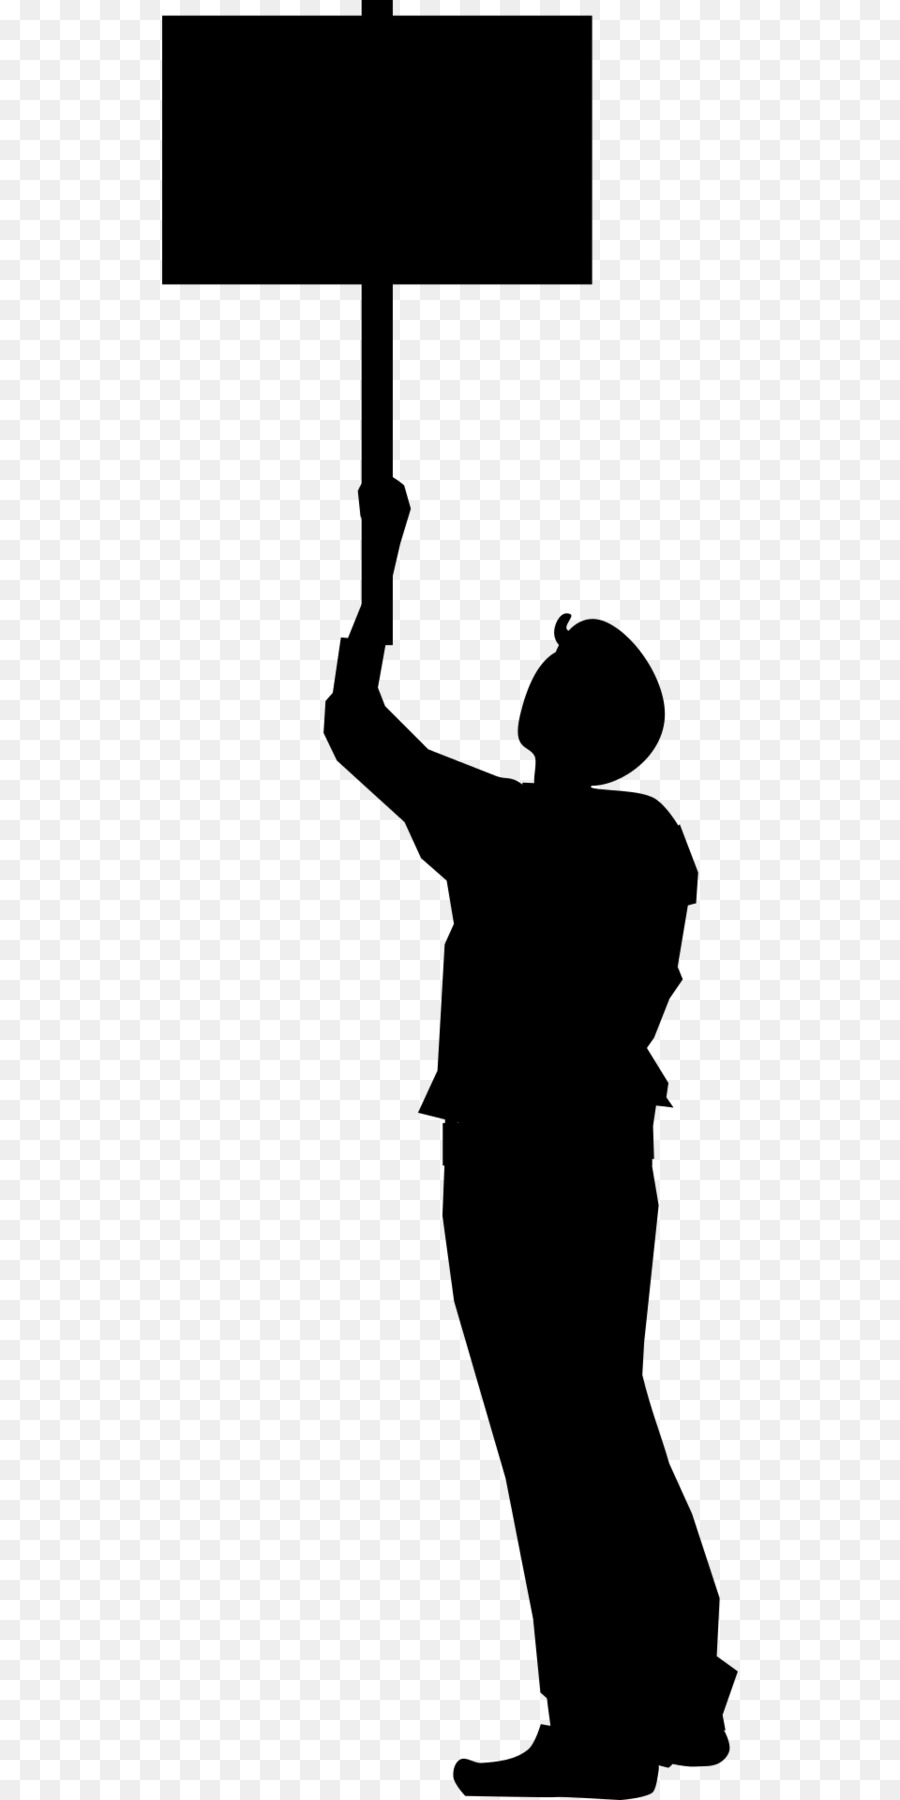 Demonstration Silhouette - signing png download - 960*1920 - Free Transparent Demonstration png Download.